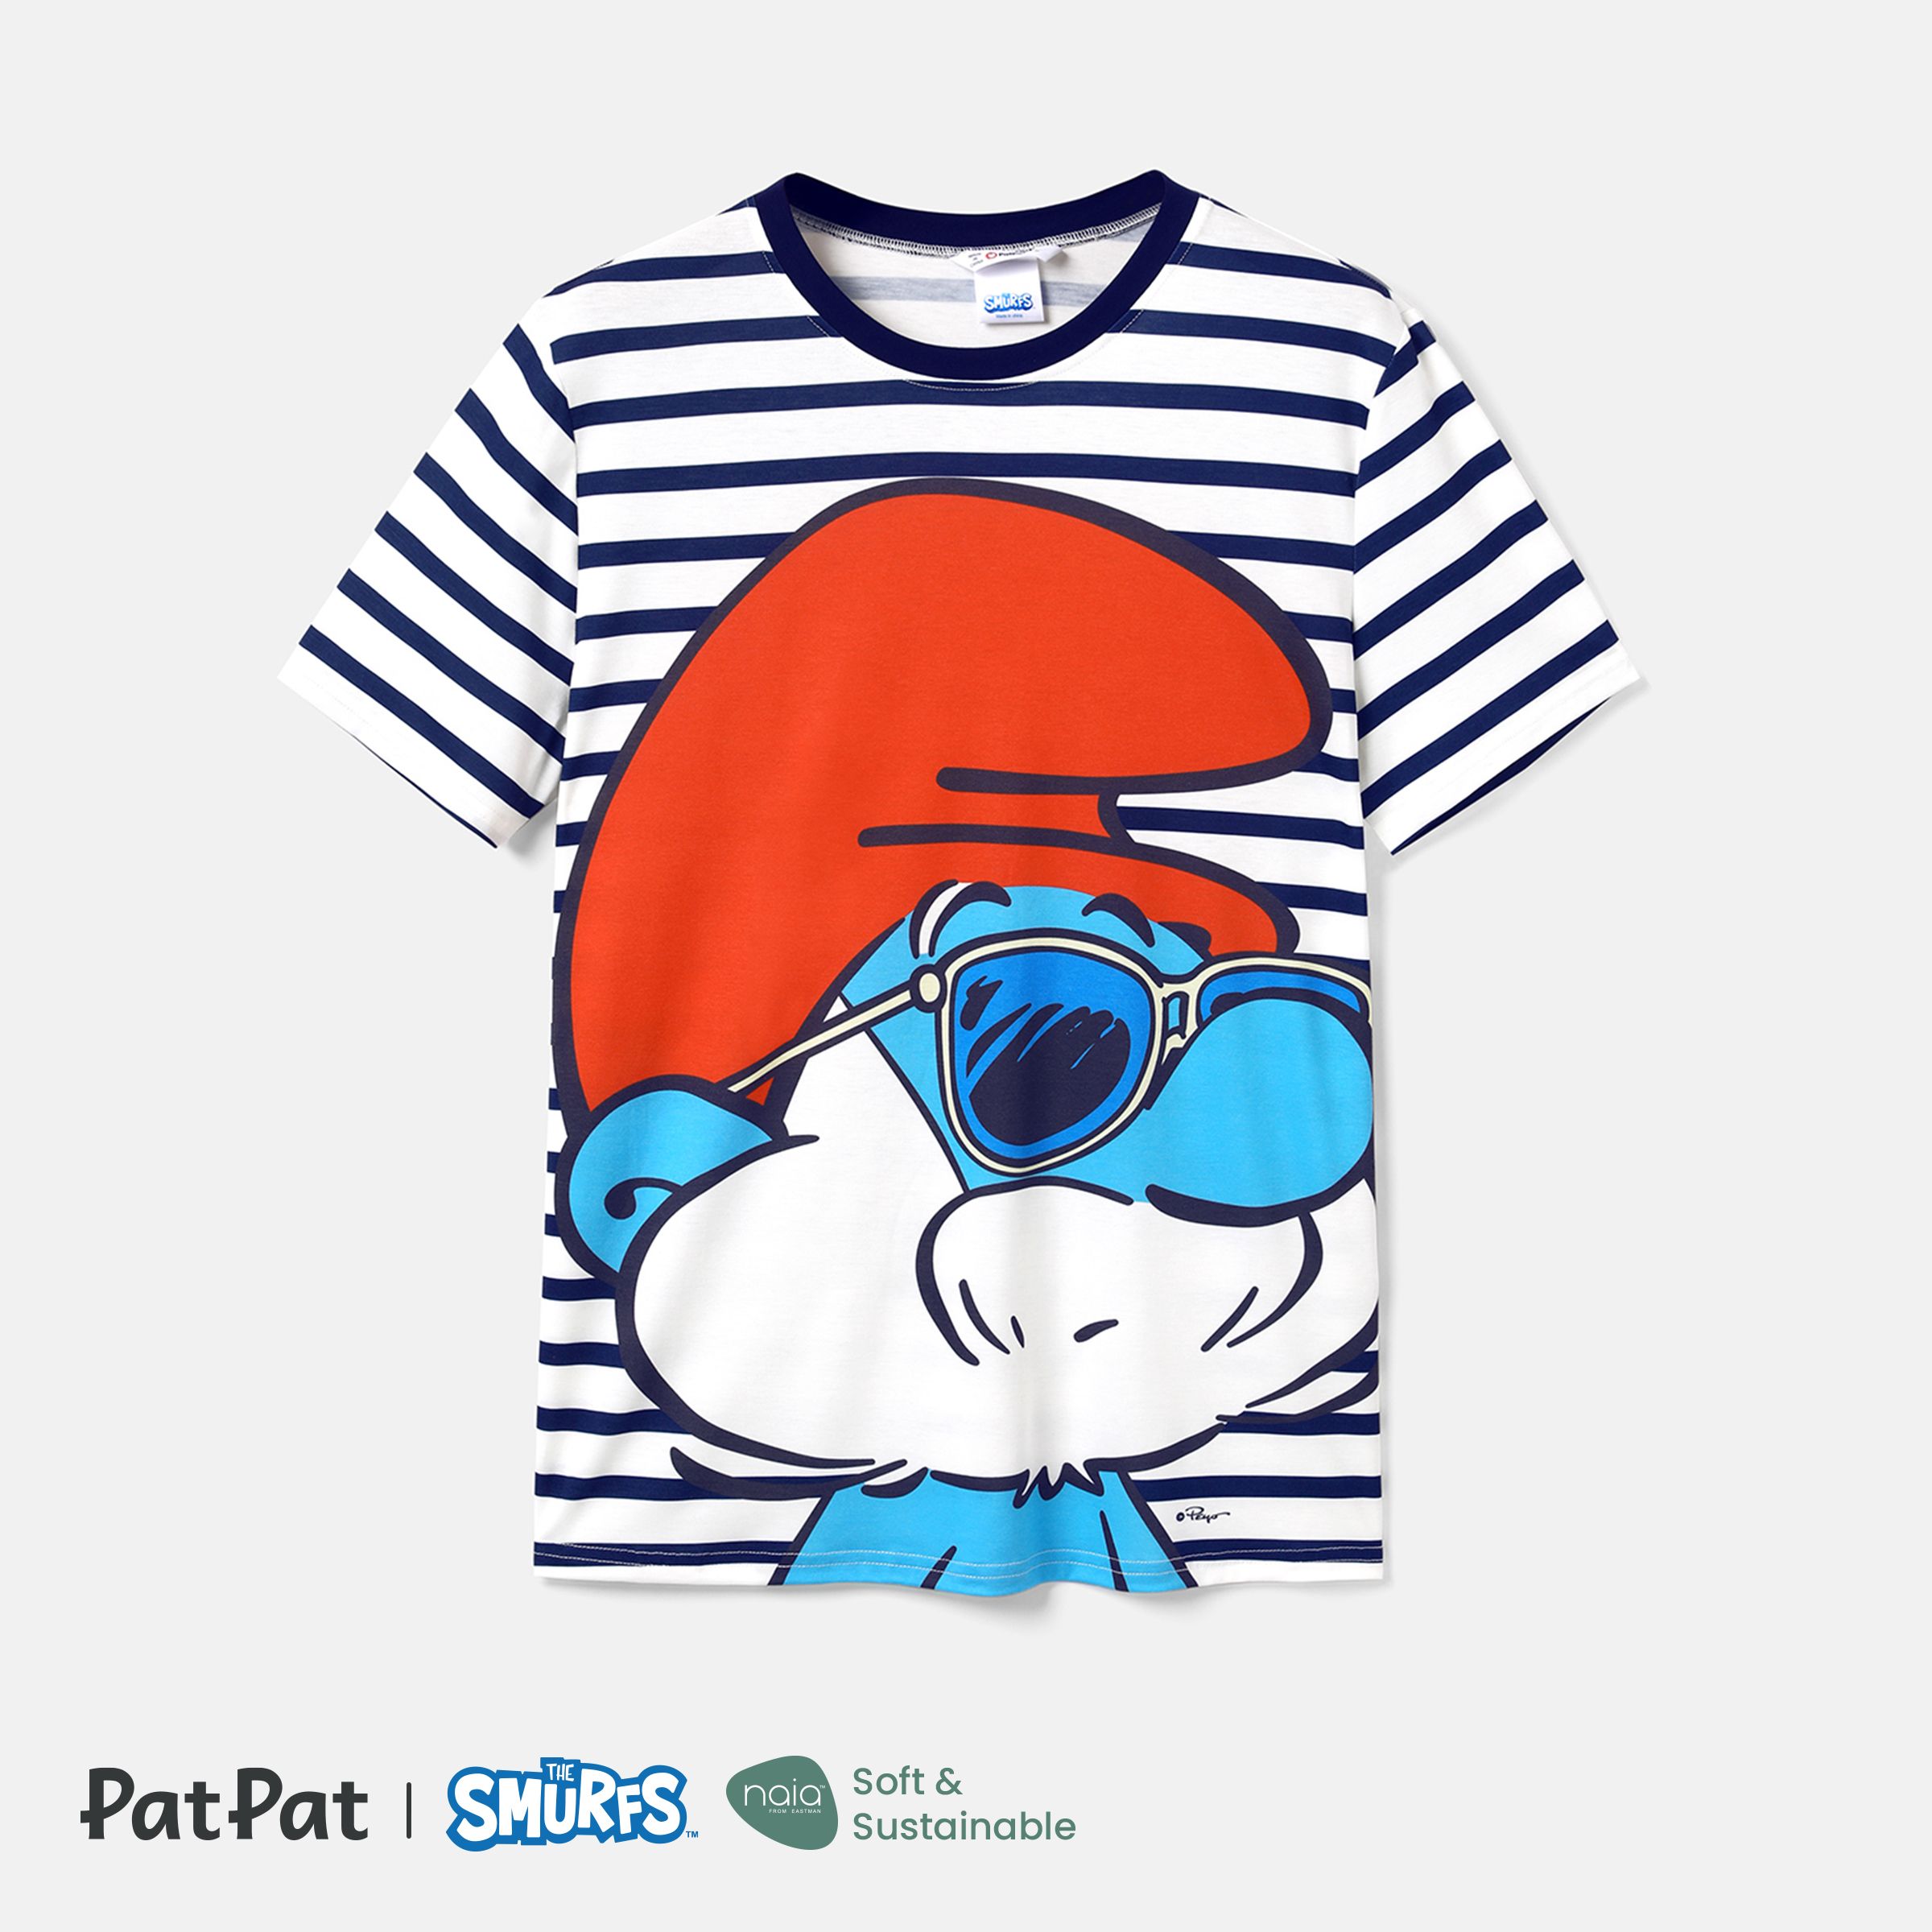 The Smurfs Family Matching Naiatm Character & Stripe Print Short-sleeve Dresses and T-shirts Sets